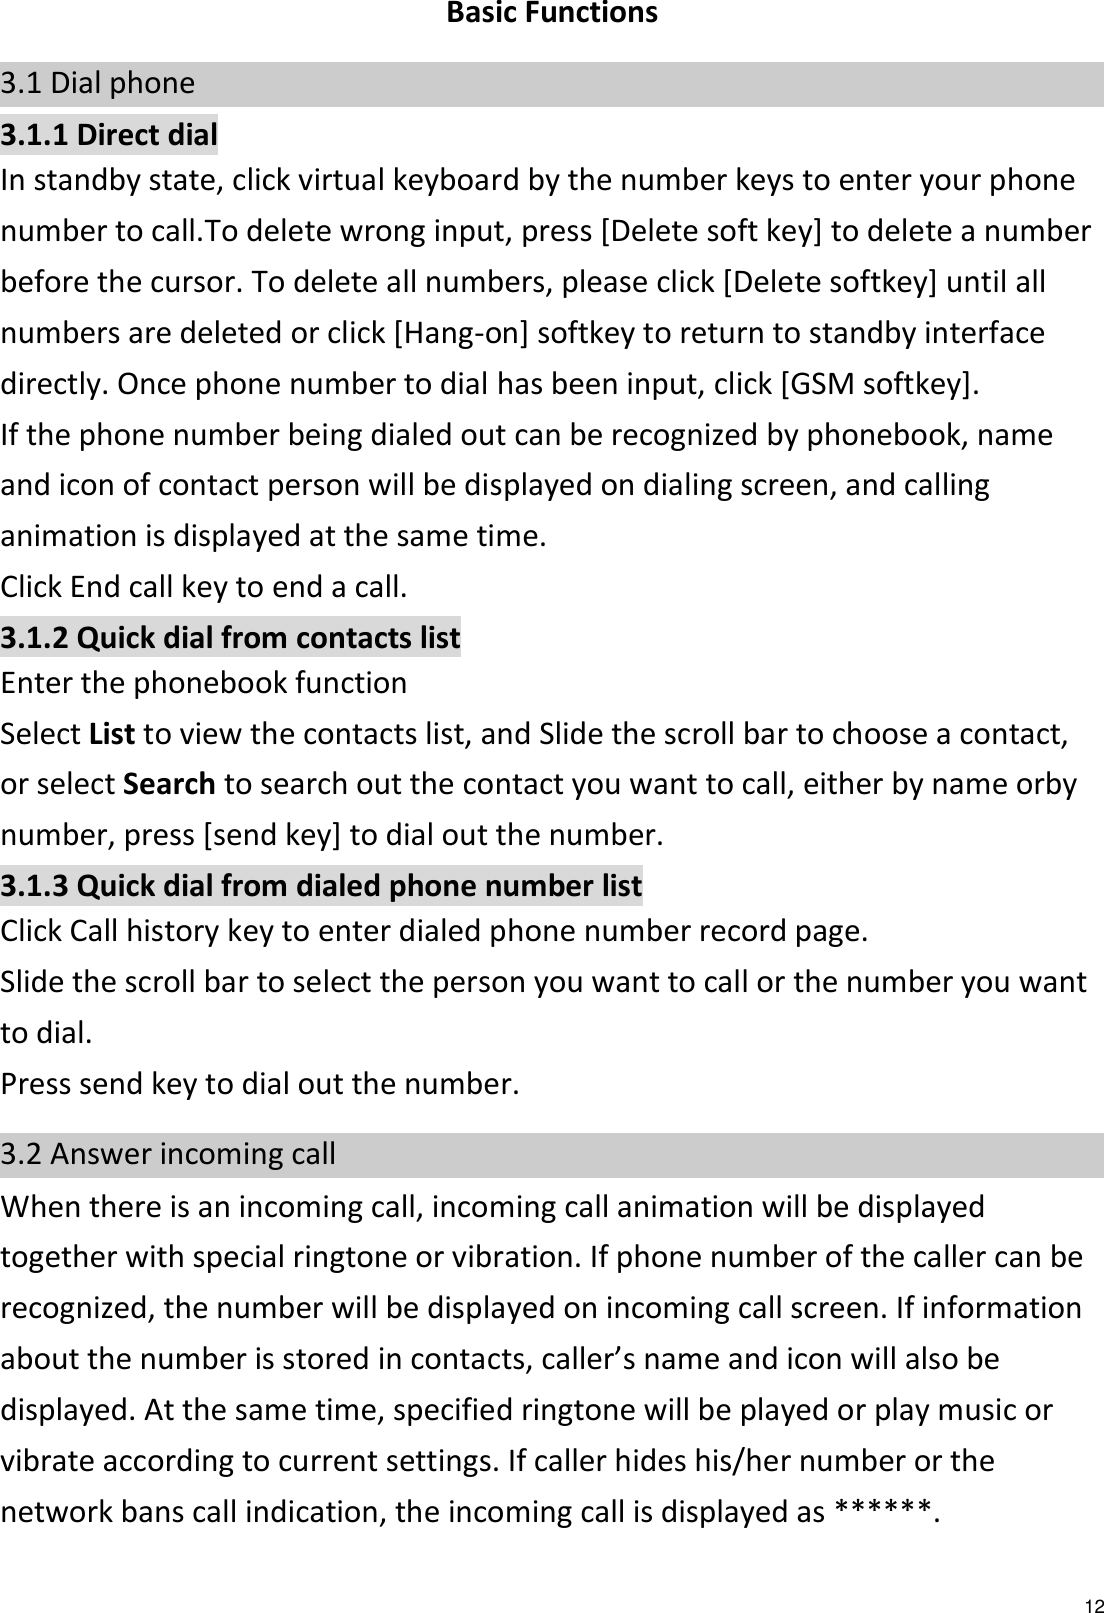  12  Basic Functions 3.1 Dial phone 3.1.1 Direct dial In standby state, click virtual keyboard by the number keys to enter your phone number to call.To delete wrong input, press [Delete soft key] to delete a number before the cursor. To delete all numbers, please click [Delete softkey] until all numbers are deleted or click [Hang-on] softkey to return to standby interface directly. Once phone number to dial has been input, click [GSM softkey]. If the phone number being dialed out can be recognized by phonebook, name and icon of contact person will be displayed on dialing screen, and calling animation is displayed at the same time. Click End call key to end a call. 3.1.2 Quick dial from contacts list Enter the phonebook function   Select List to view the contacts list, and Slide the scroll bar to choose a contact, or select Search to search out the contact you want to call, either by name orby number, press [send key] to dial out the number. 3.1.3 Quick dial from dialed phone number list Click Call history key to enter dialed phone number record page. Slide the scroll bar to select the person you want to call or the number you want to dial. Press send key to dial out the number. 3.2 Answer incoming call When there is an incoming call, incoming call animation will be displayed together with special ringtone or vibration. If phone number of the caller can be recognized, the number will be displayed on incoming call screen. If information about the number is stored in contacts, caller’s name and icon will also be displayed. At the same time, specified ringtone will be played or play music or vibrate according to current settings. If caller hides his/her number or the network bans call indication, the incoming call is displayed as ******. 